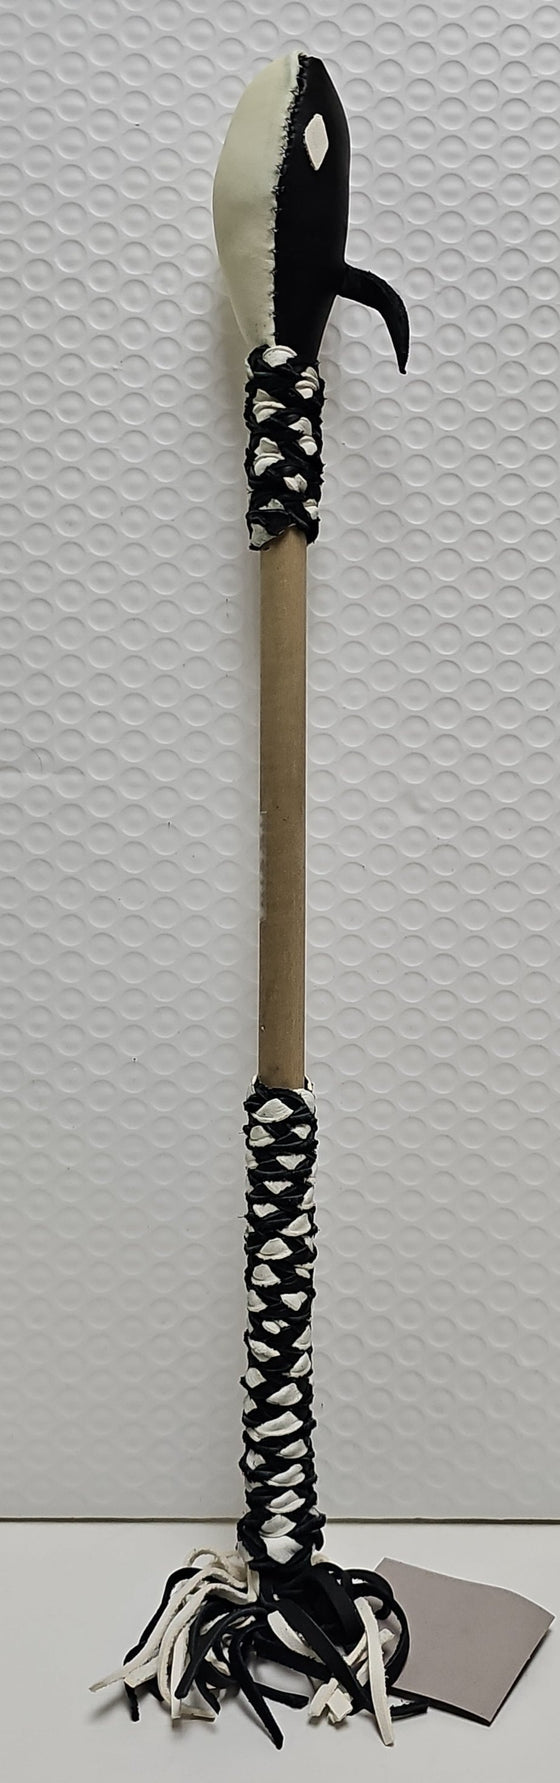 Orca Black/White Drumstick